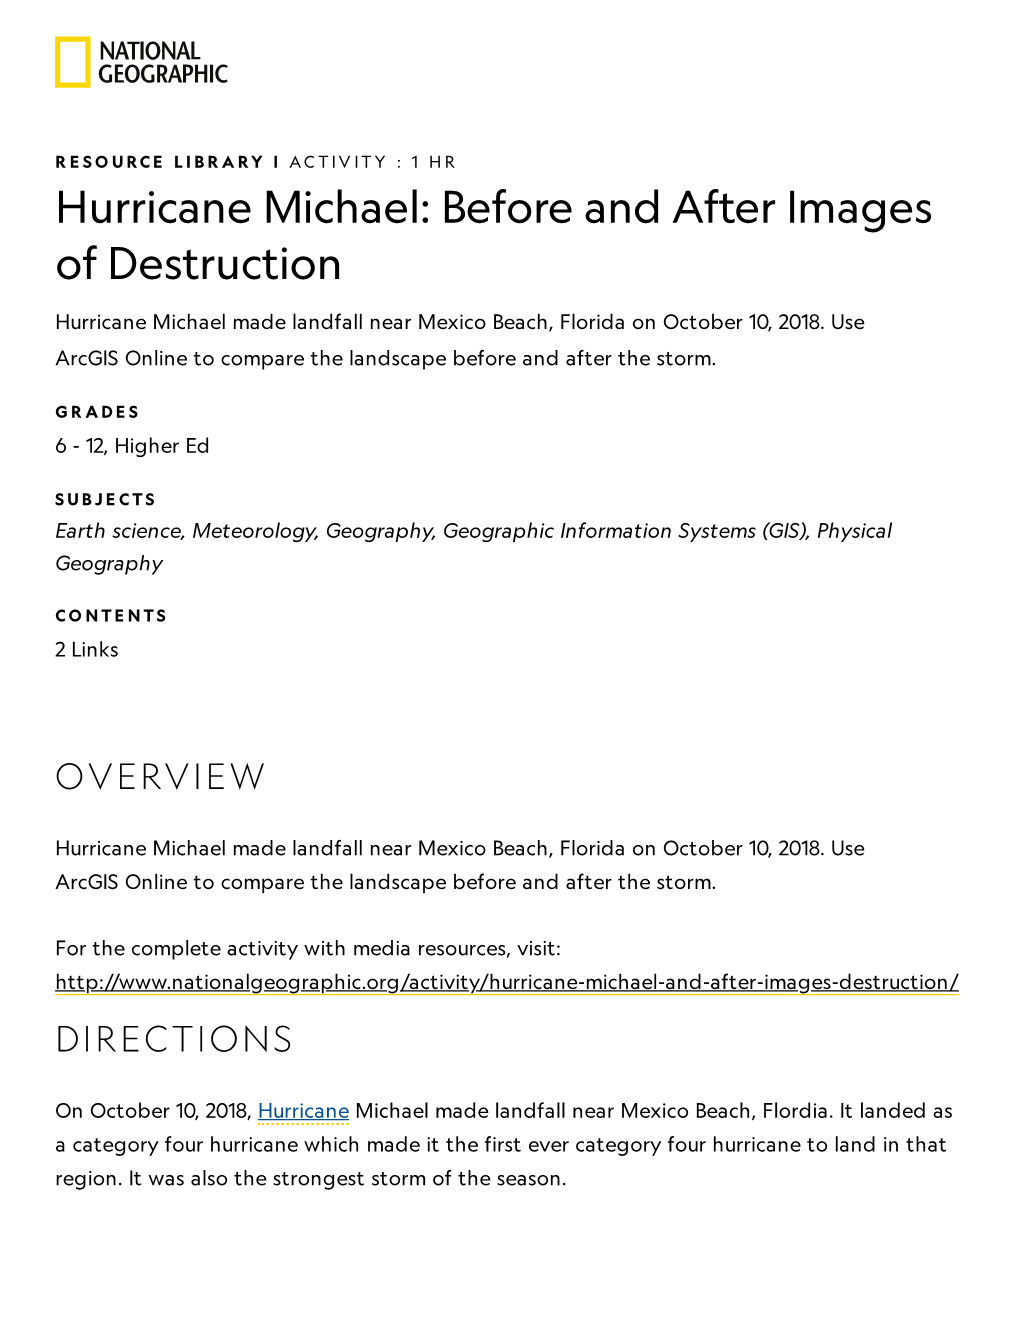 Hurricane Michael: Before and After Images of Destruction | National Geographic Society